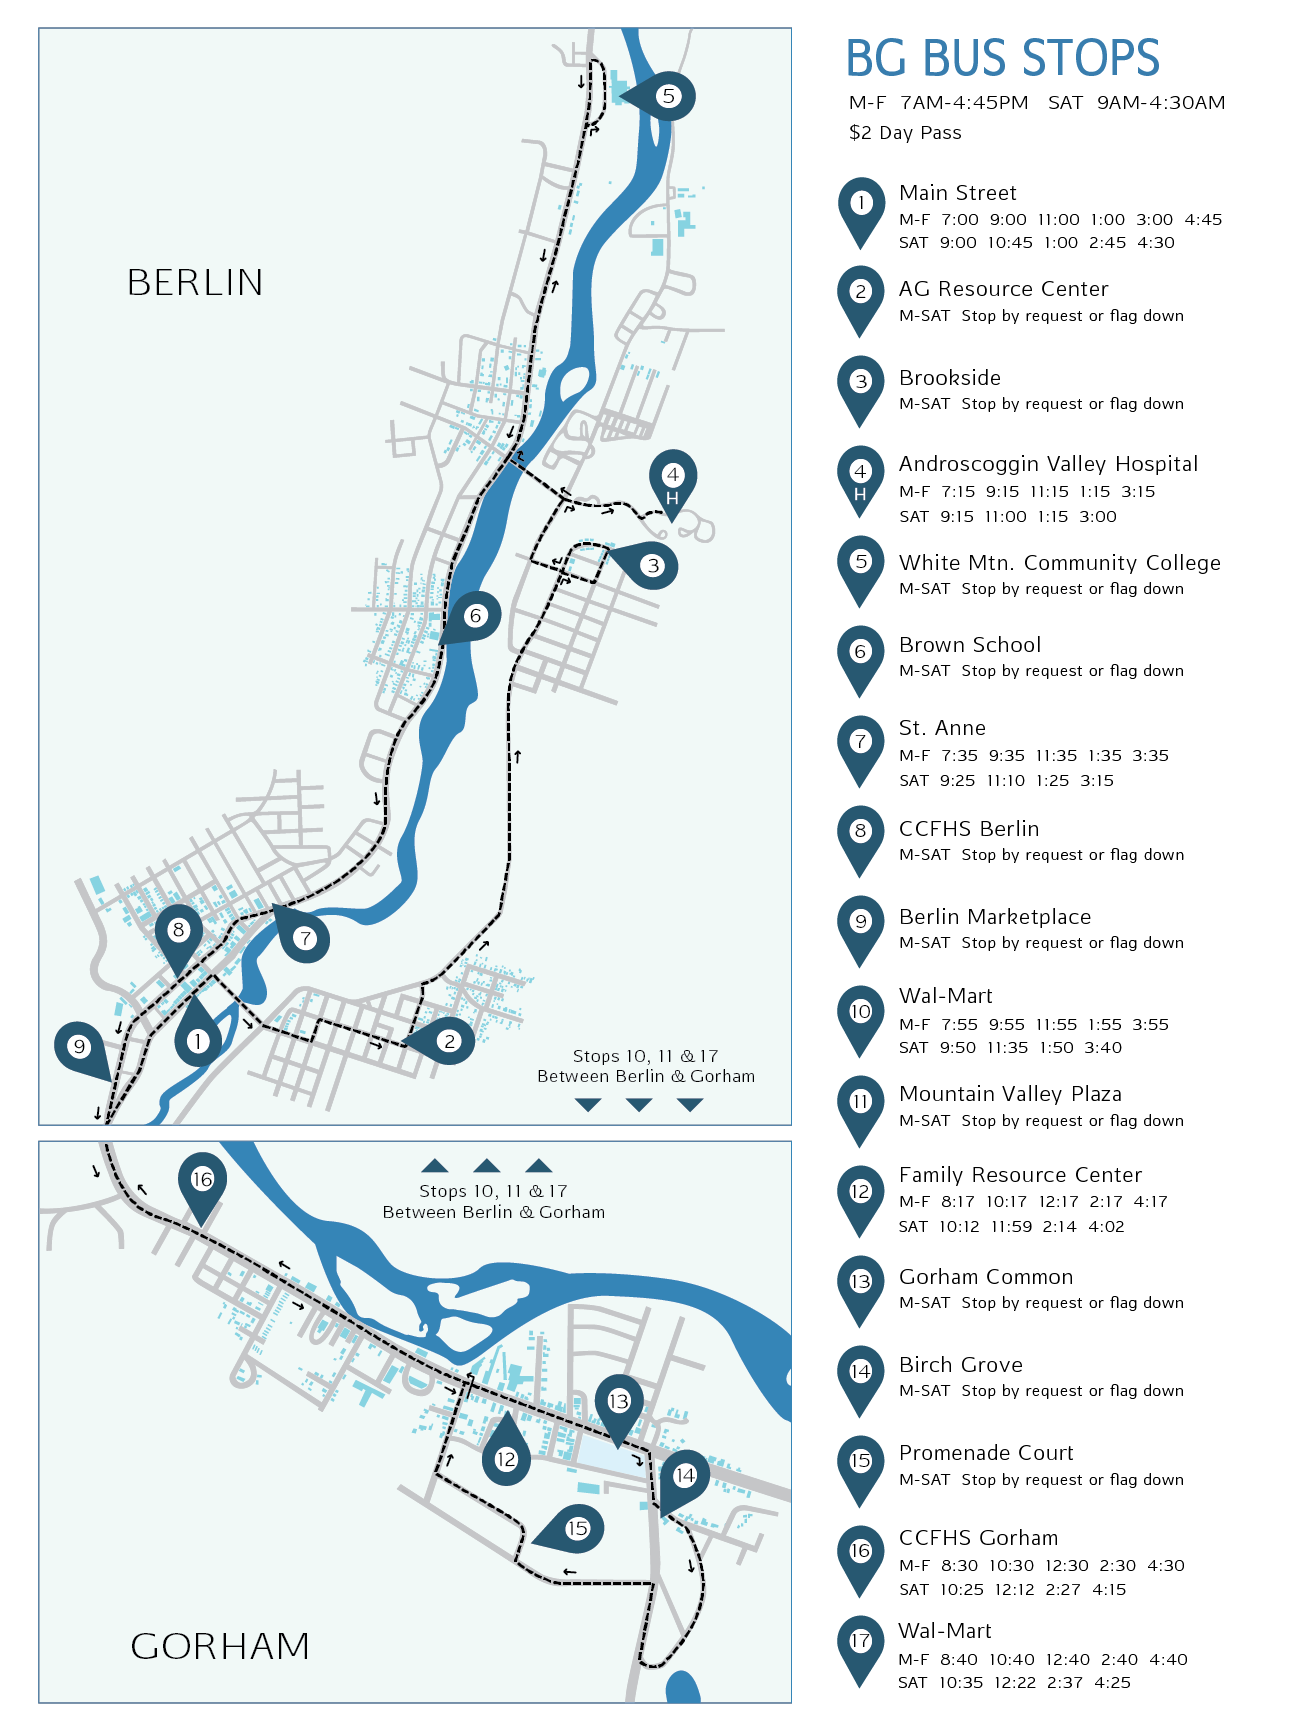 A map of the 17 stops along the Berlin Gorham Flex Route.